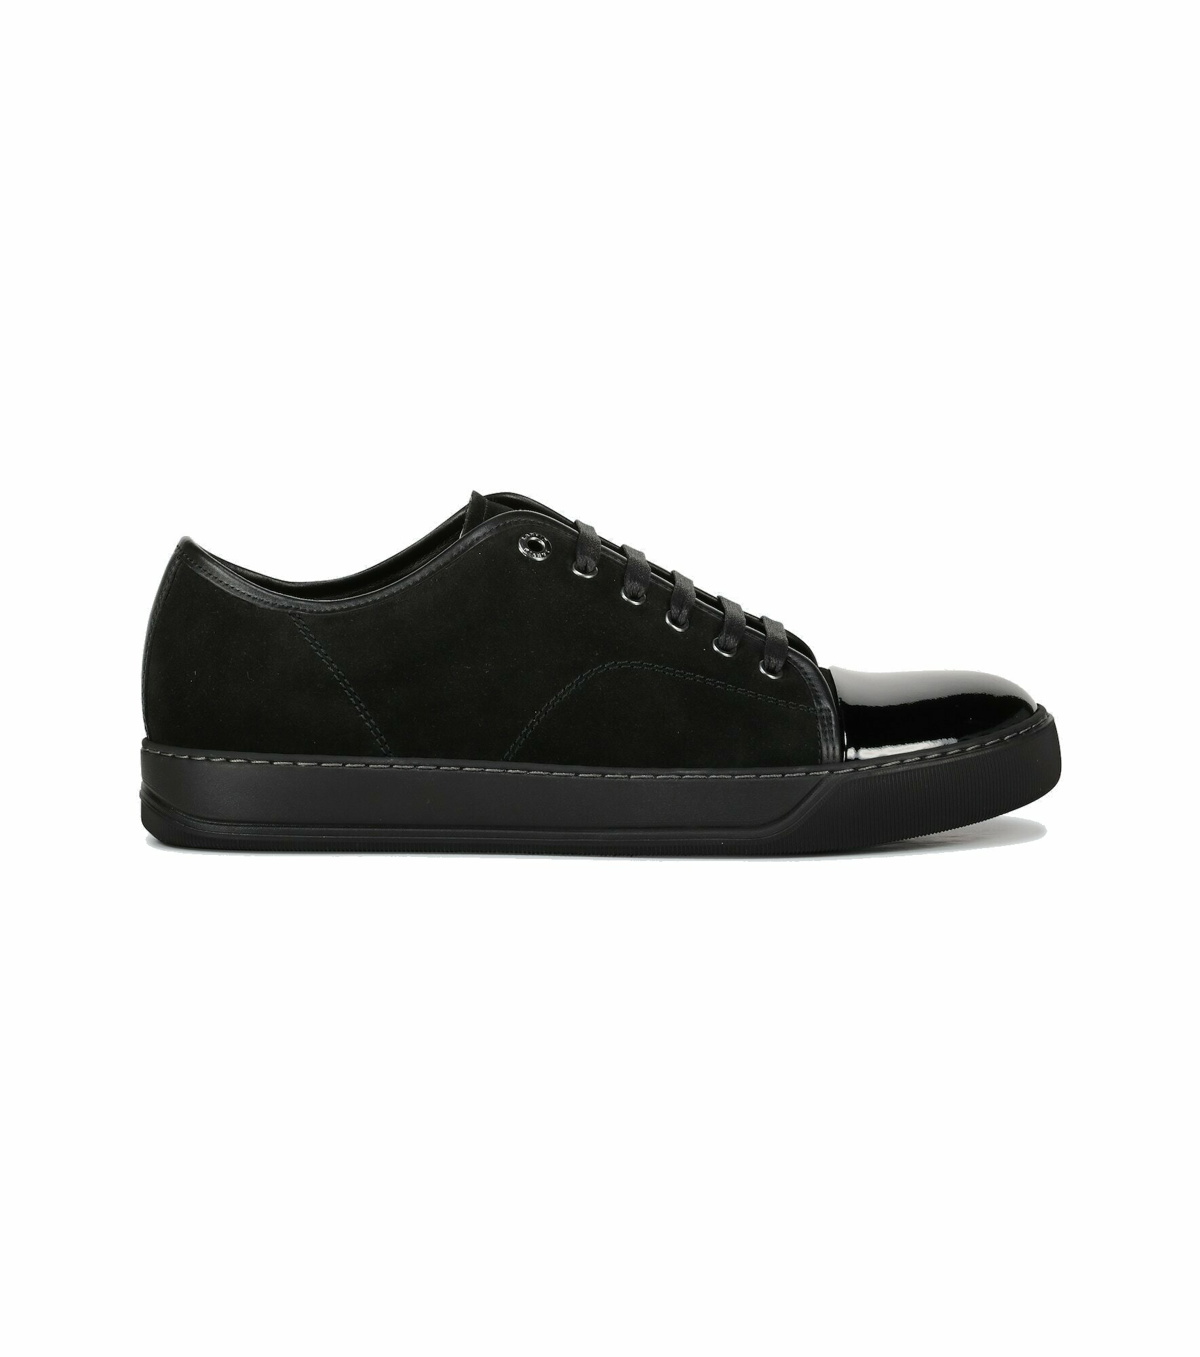 Lanvin - Suede and leather cap-toe sneakers Lanvin